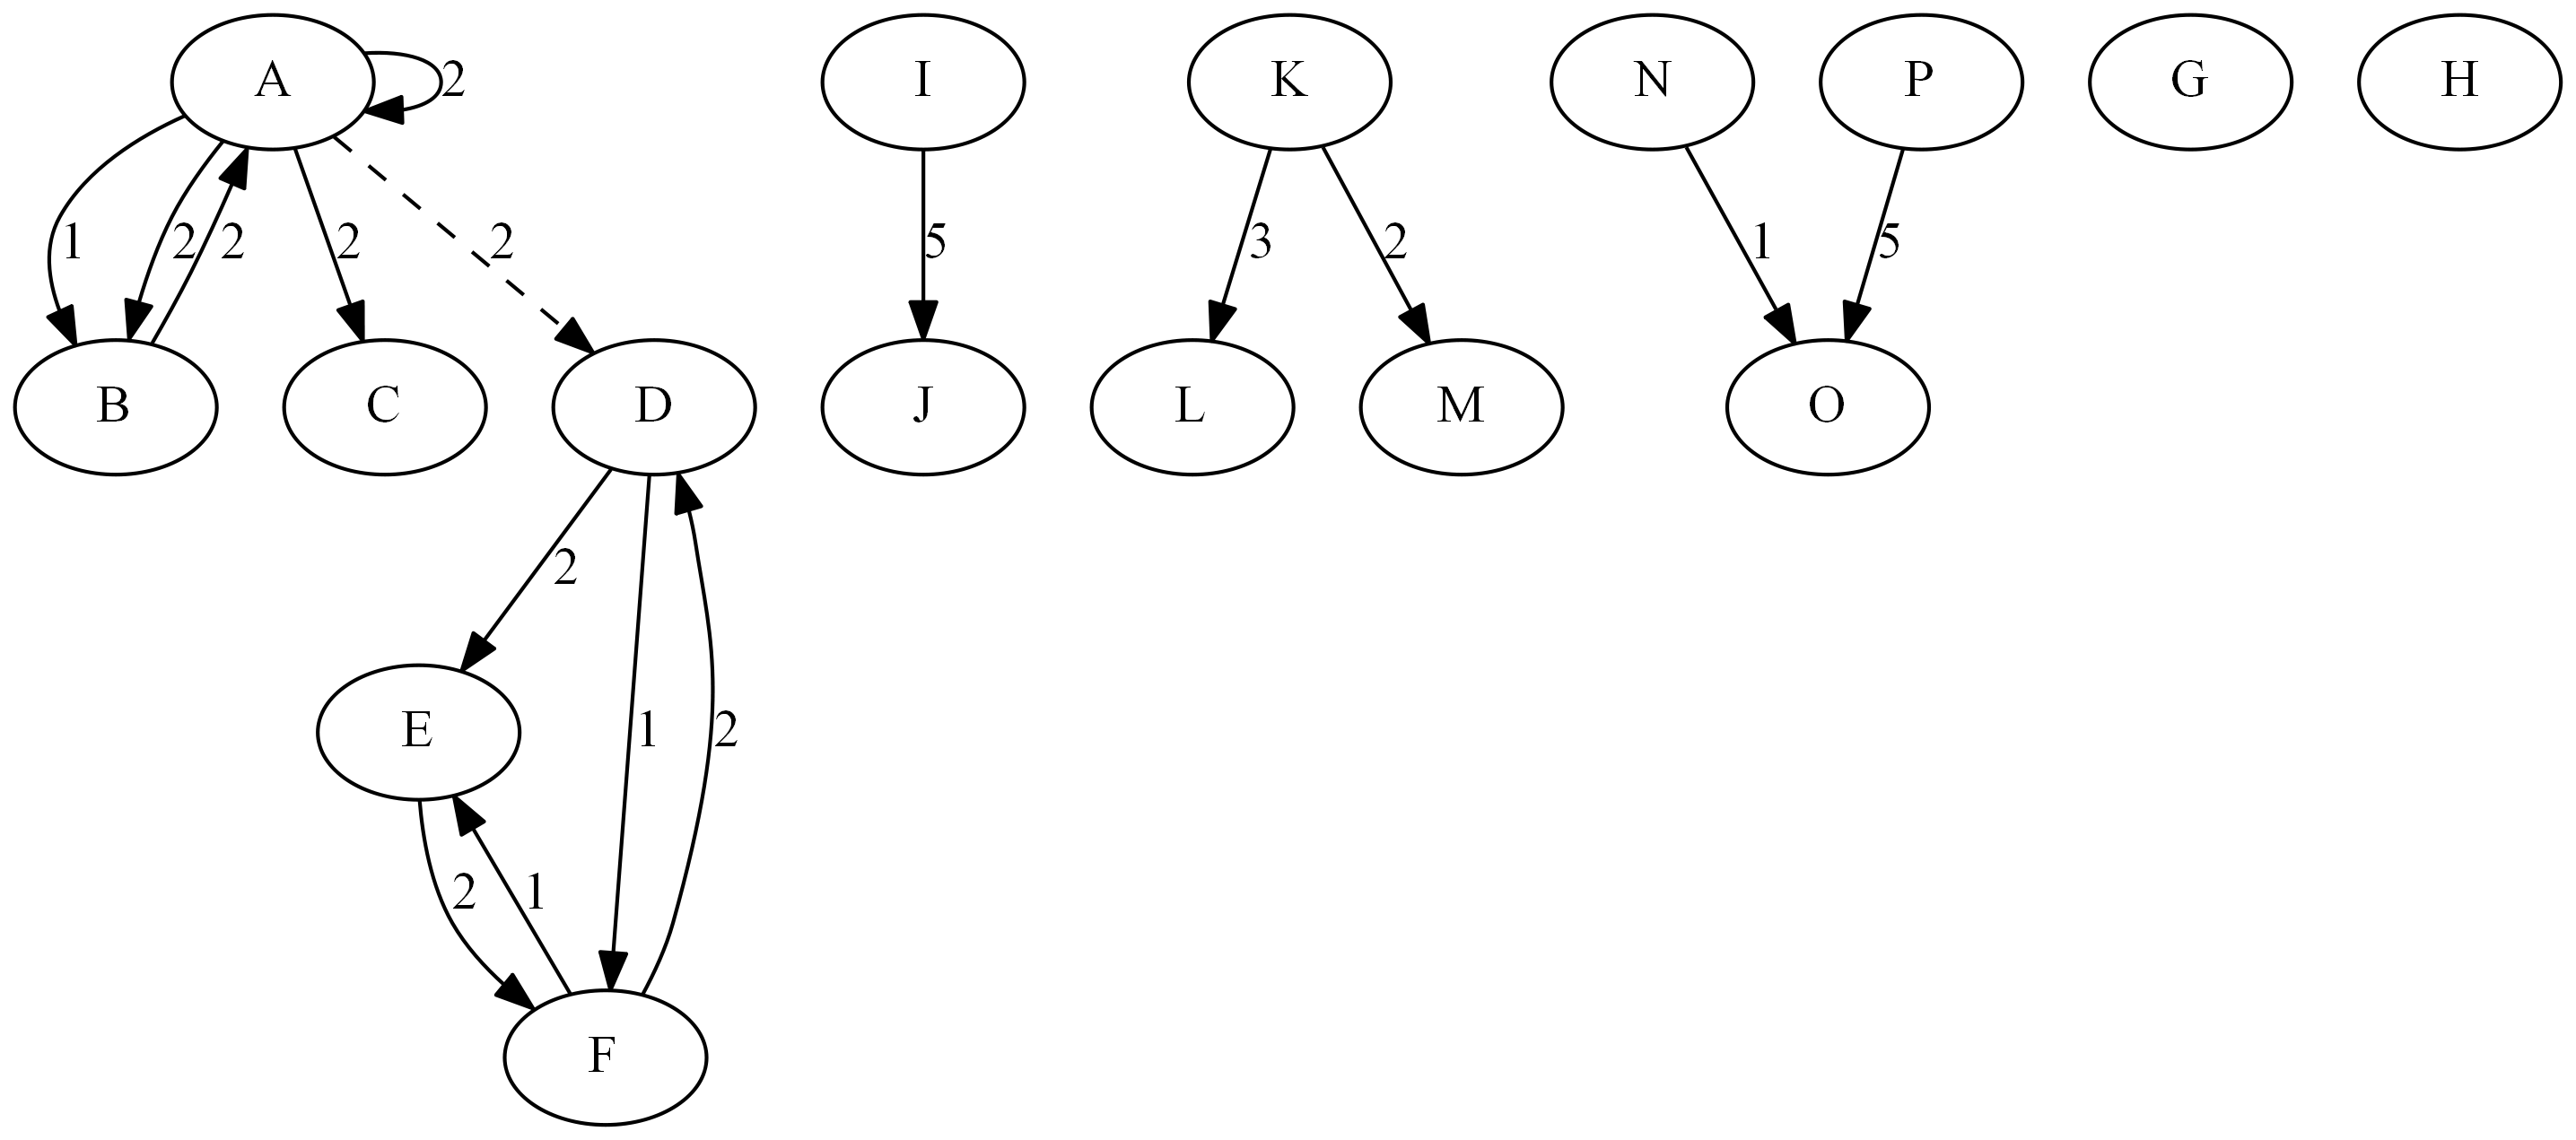 Induced Subgraphs of